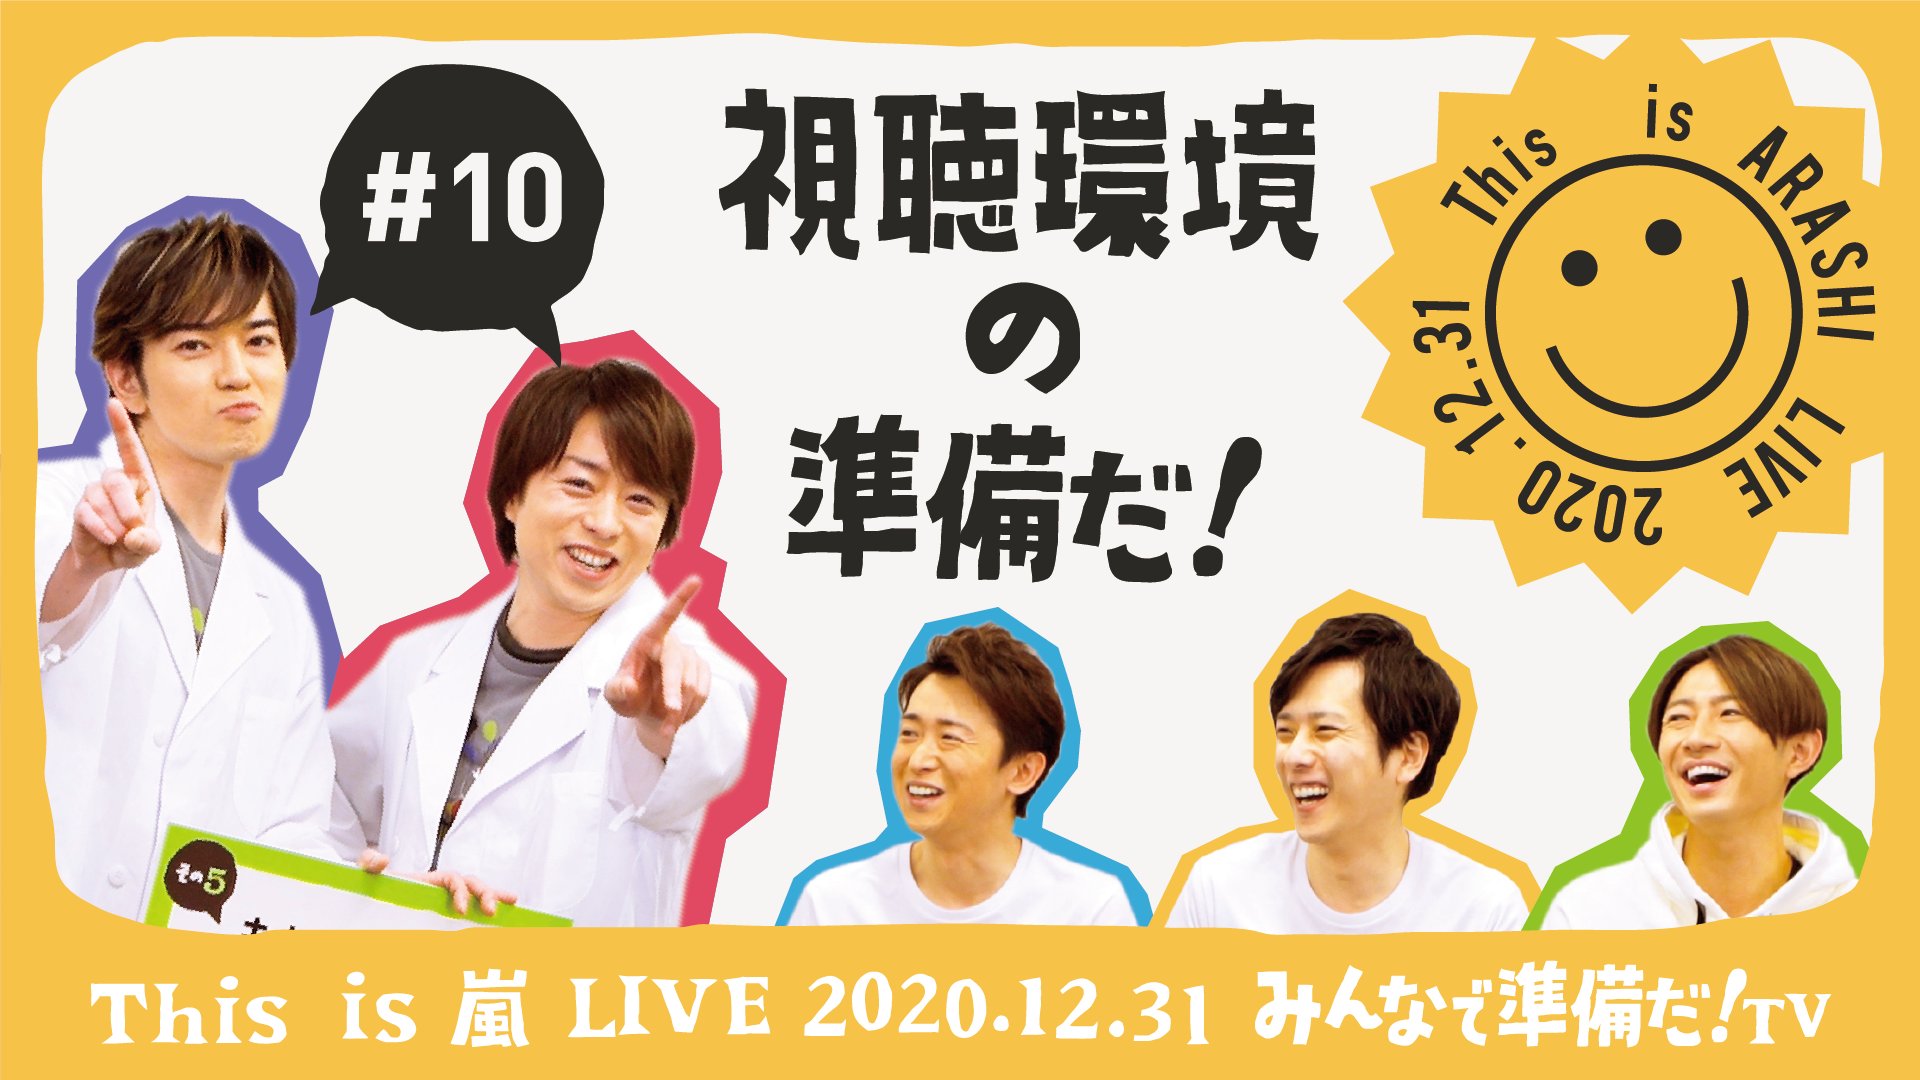 This is 嵐 LIVE 2020.12.31 on X: 